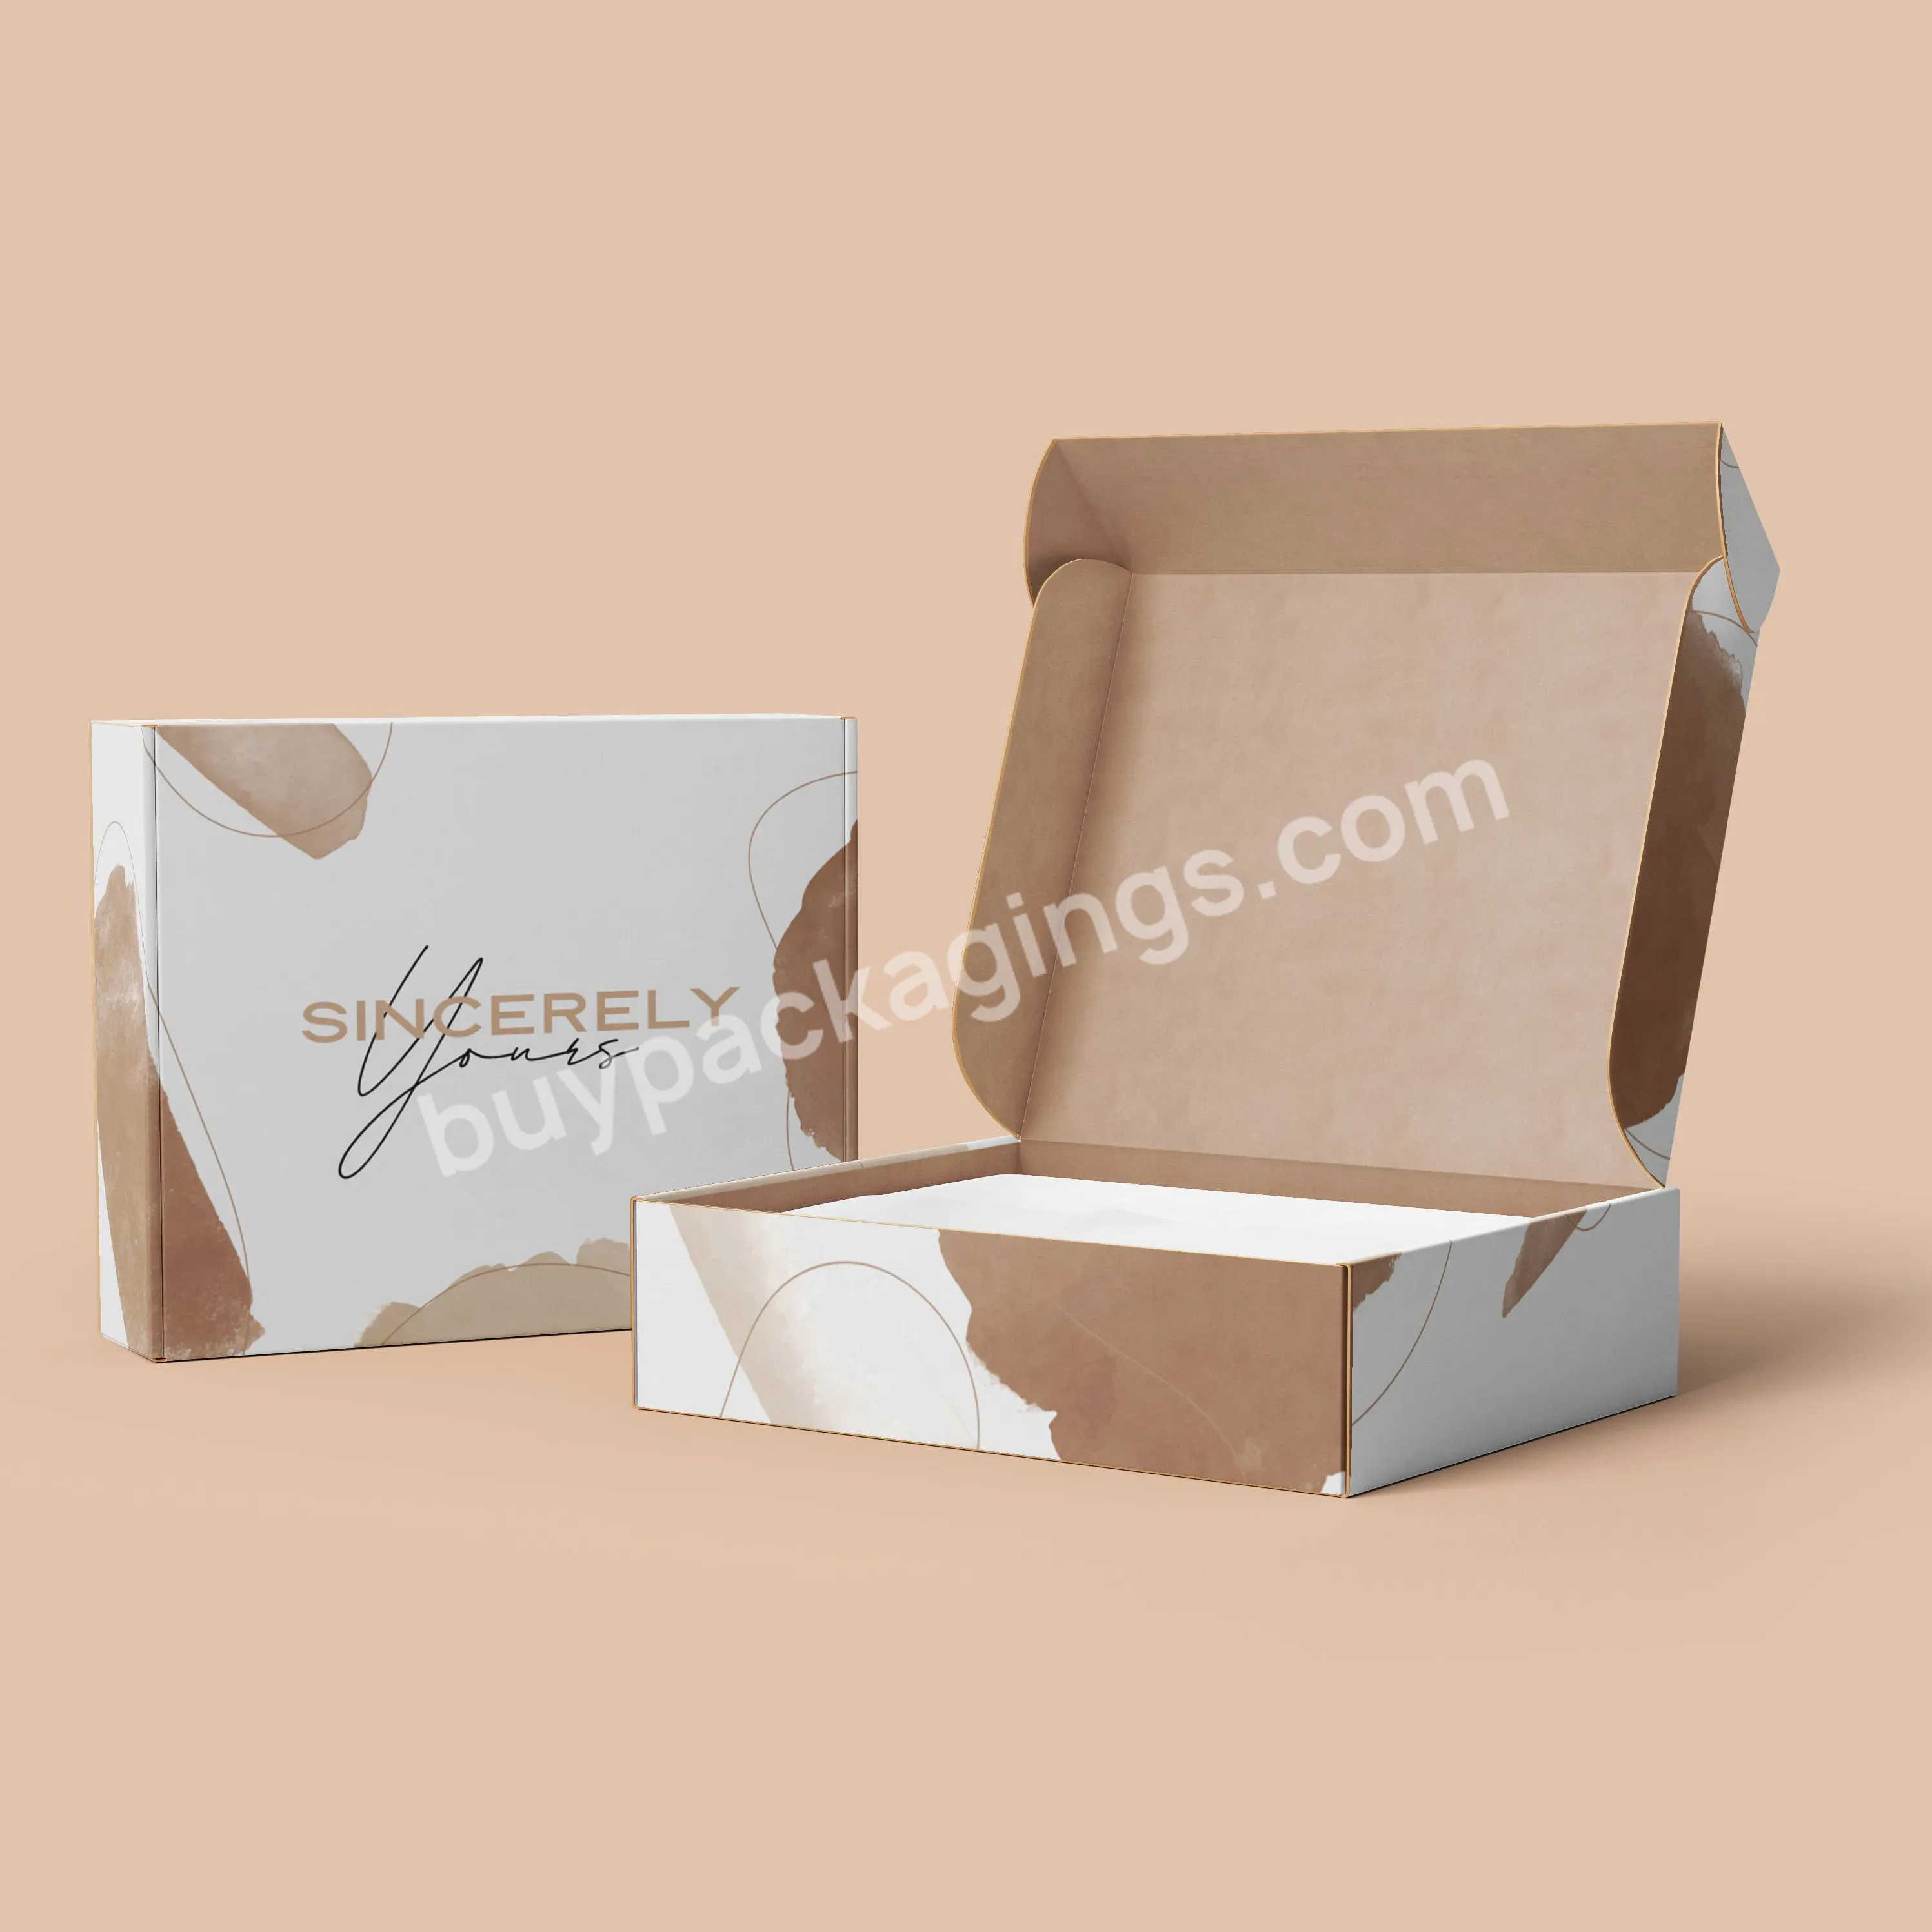 Oem China Manufacturer Factory High Quality Lamination Wholesale Cmyk Printing Paper Box Packaging